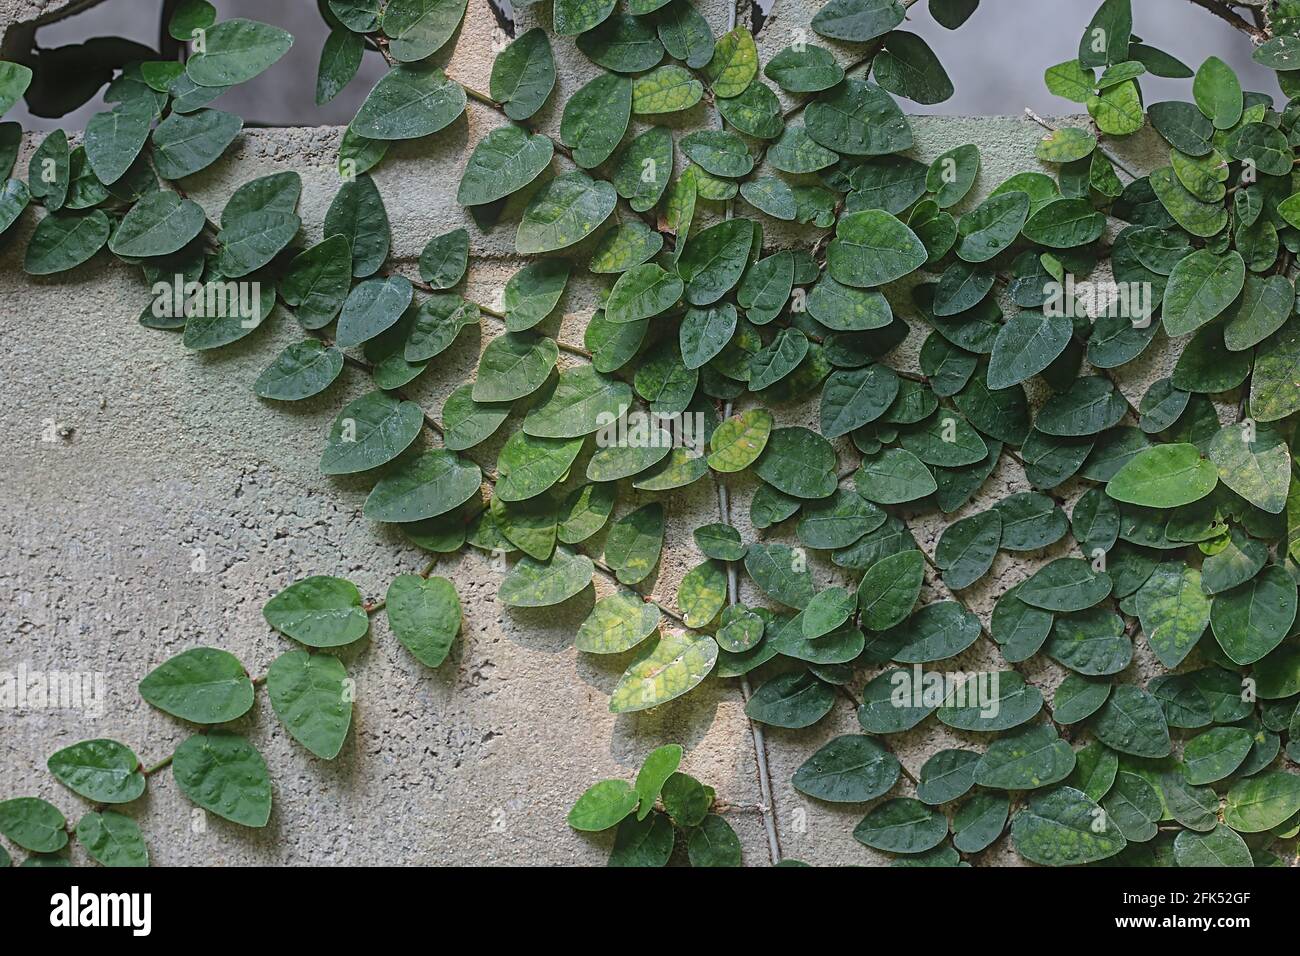 Air purifying ivy, or Ficus pumila, is planted on a brick wall. Grow indoors to maintain a good environment. Stock Photo